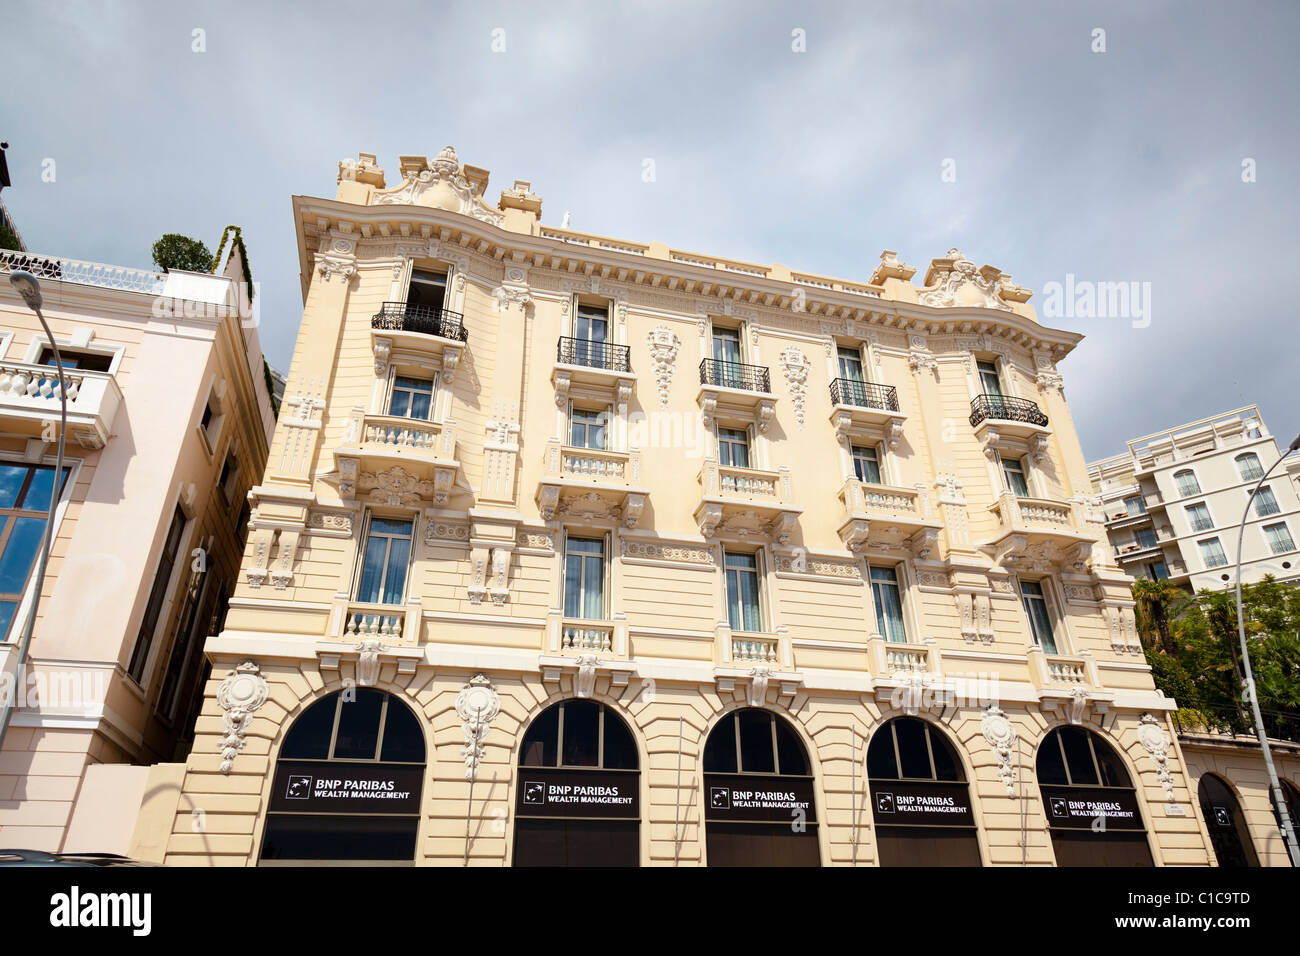 Ornate facade of the BNP Paribas wealth management building in Monaco. Stock Photo